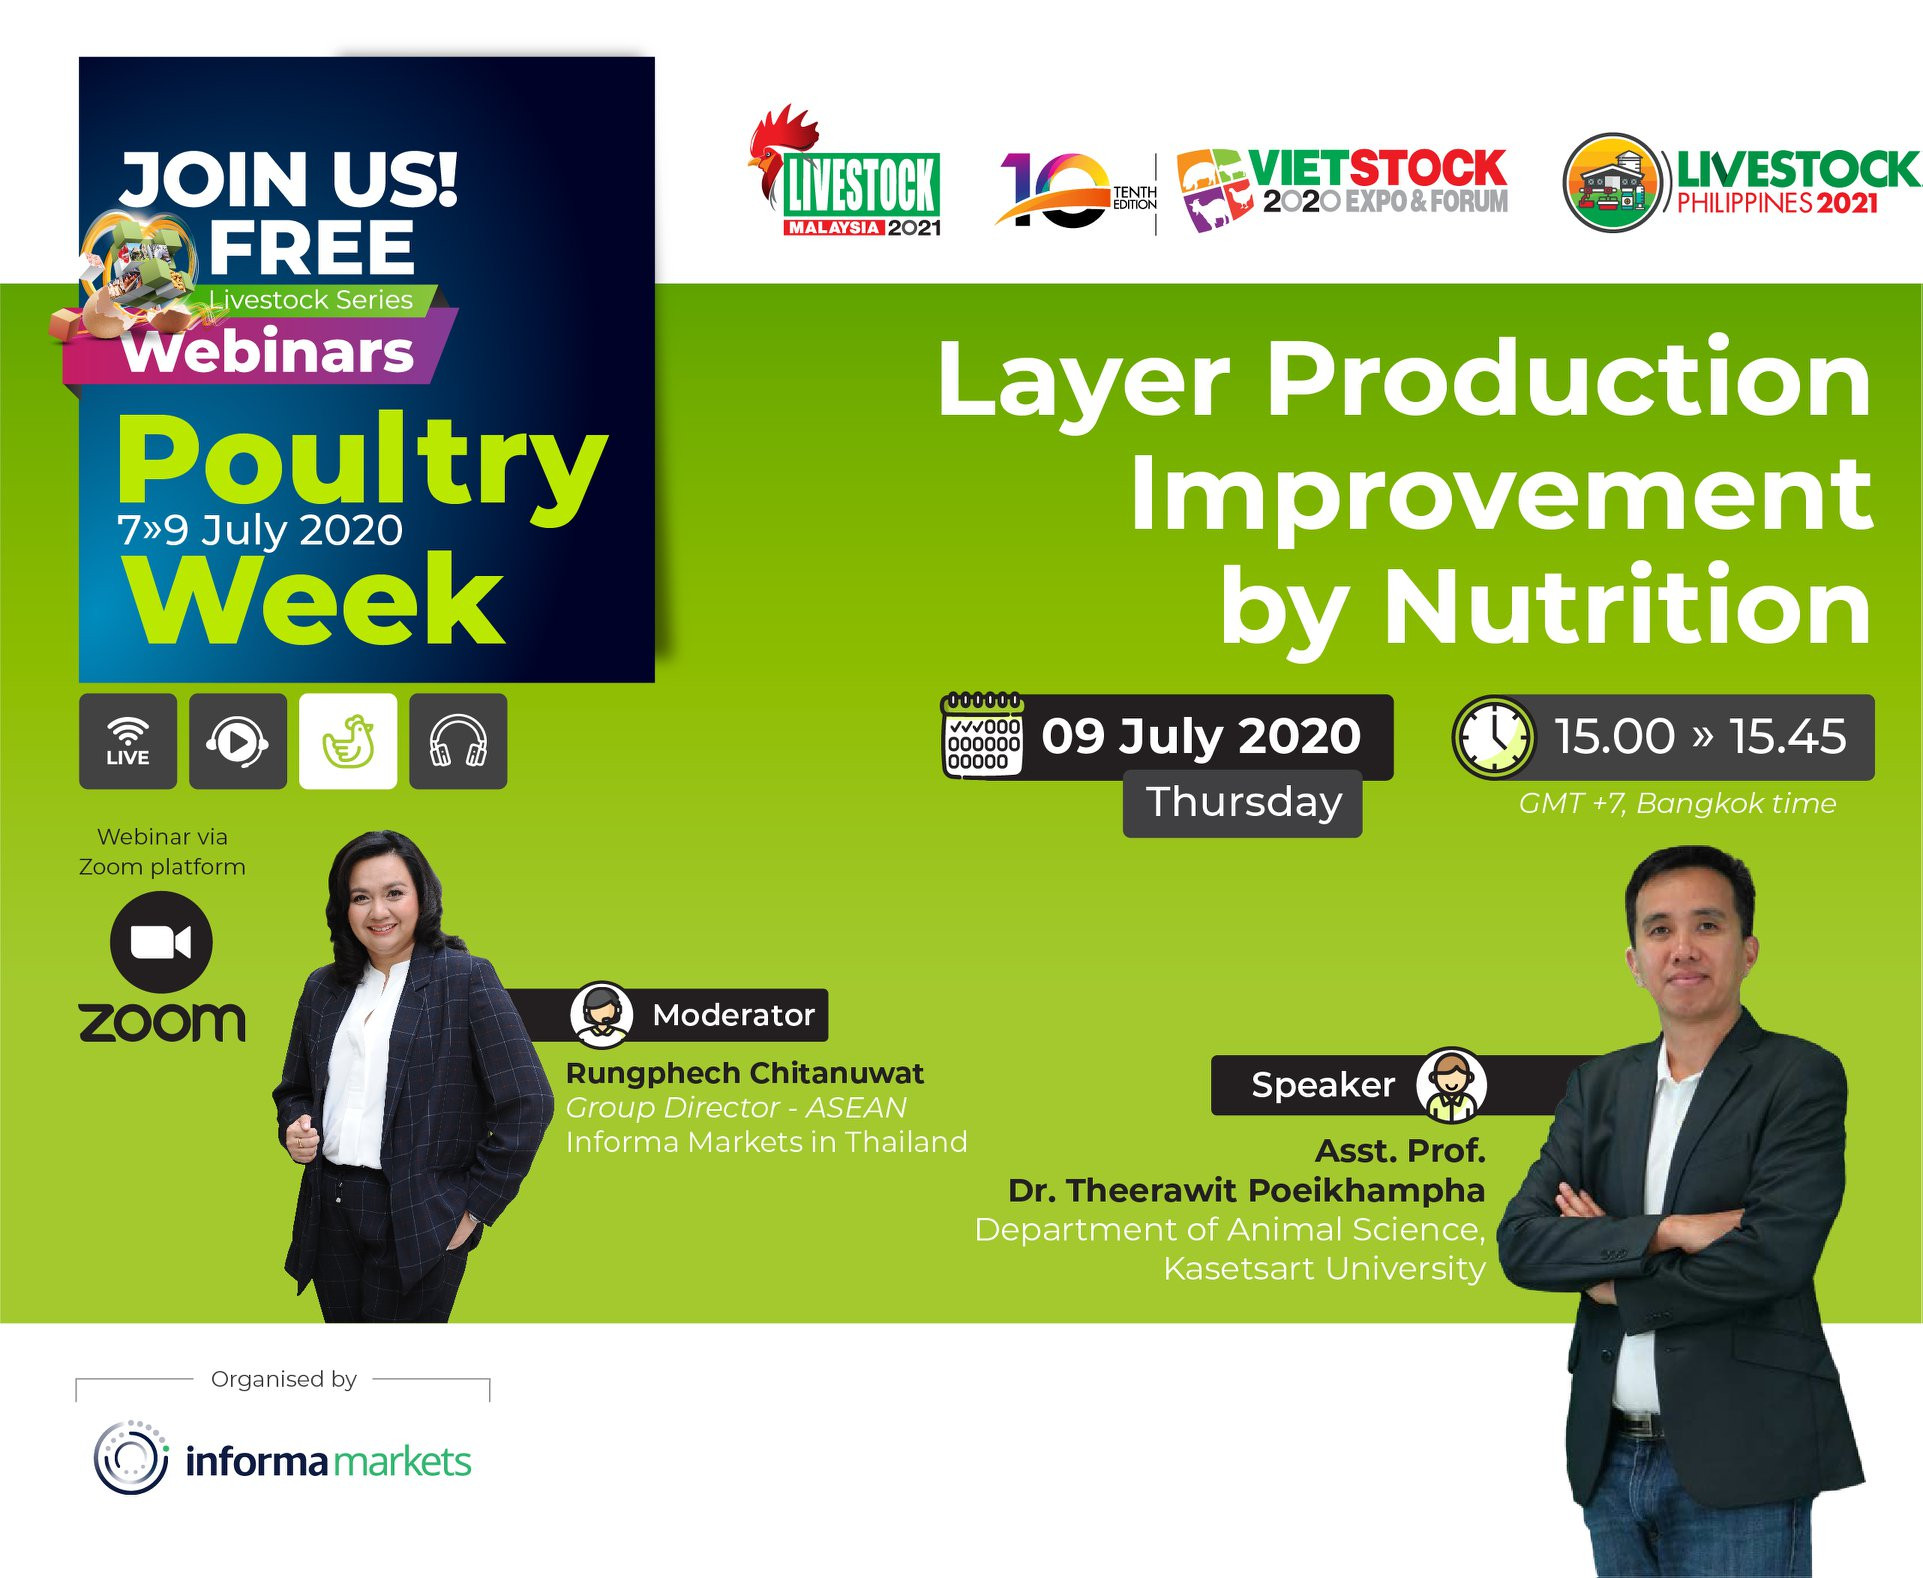 Poultry Week: Layer Production Improvement by Nutrition